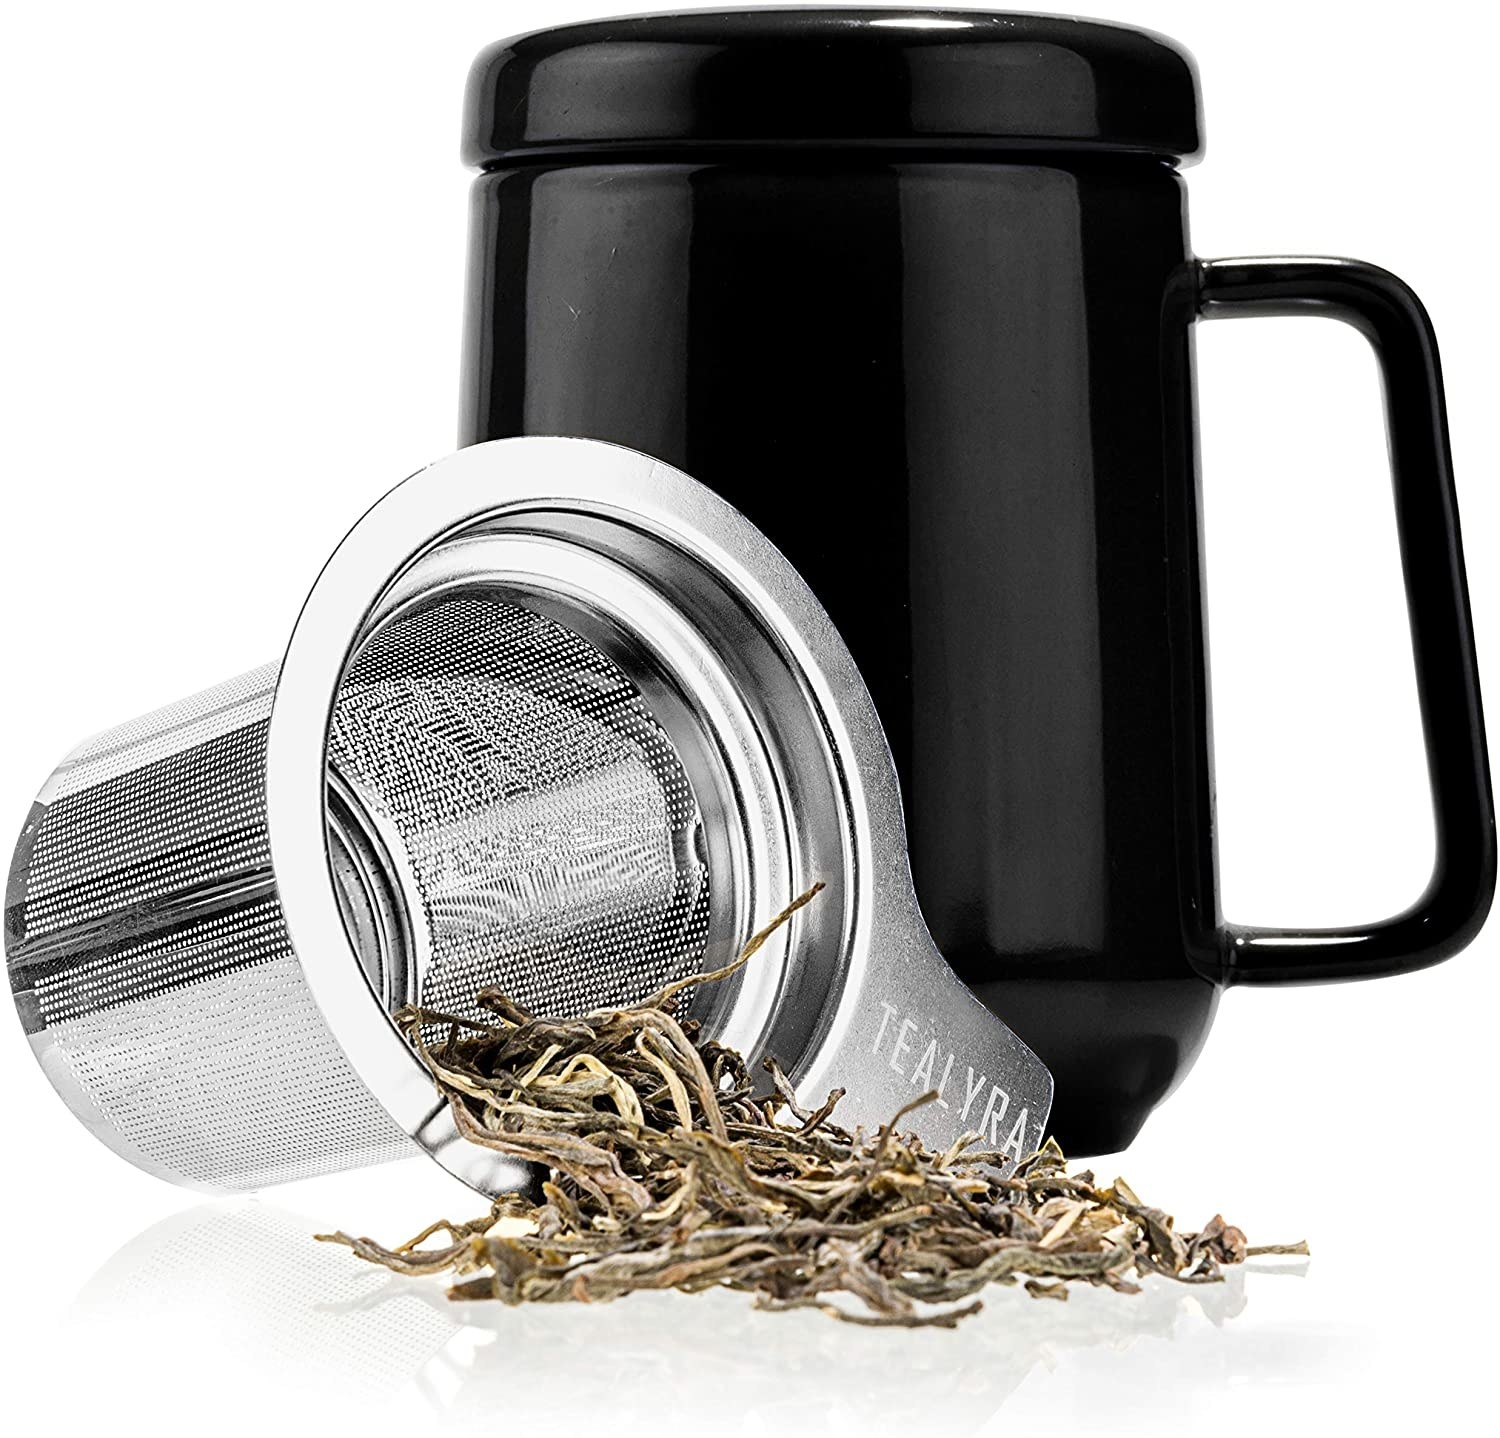 A ceramic mug with a handle and a steel tea infuser with tea leaves spilling out of it